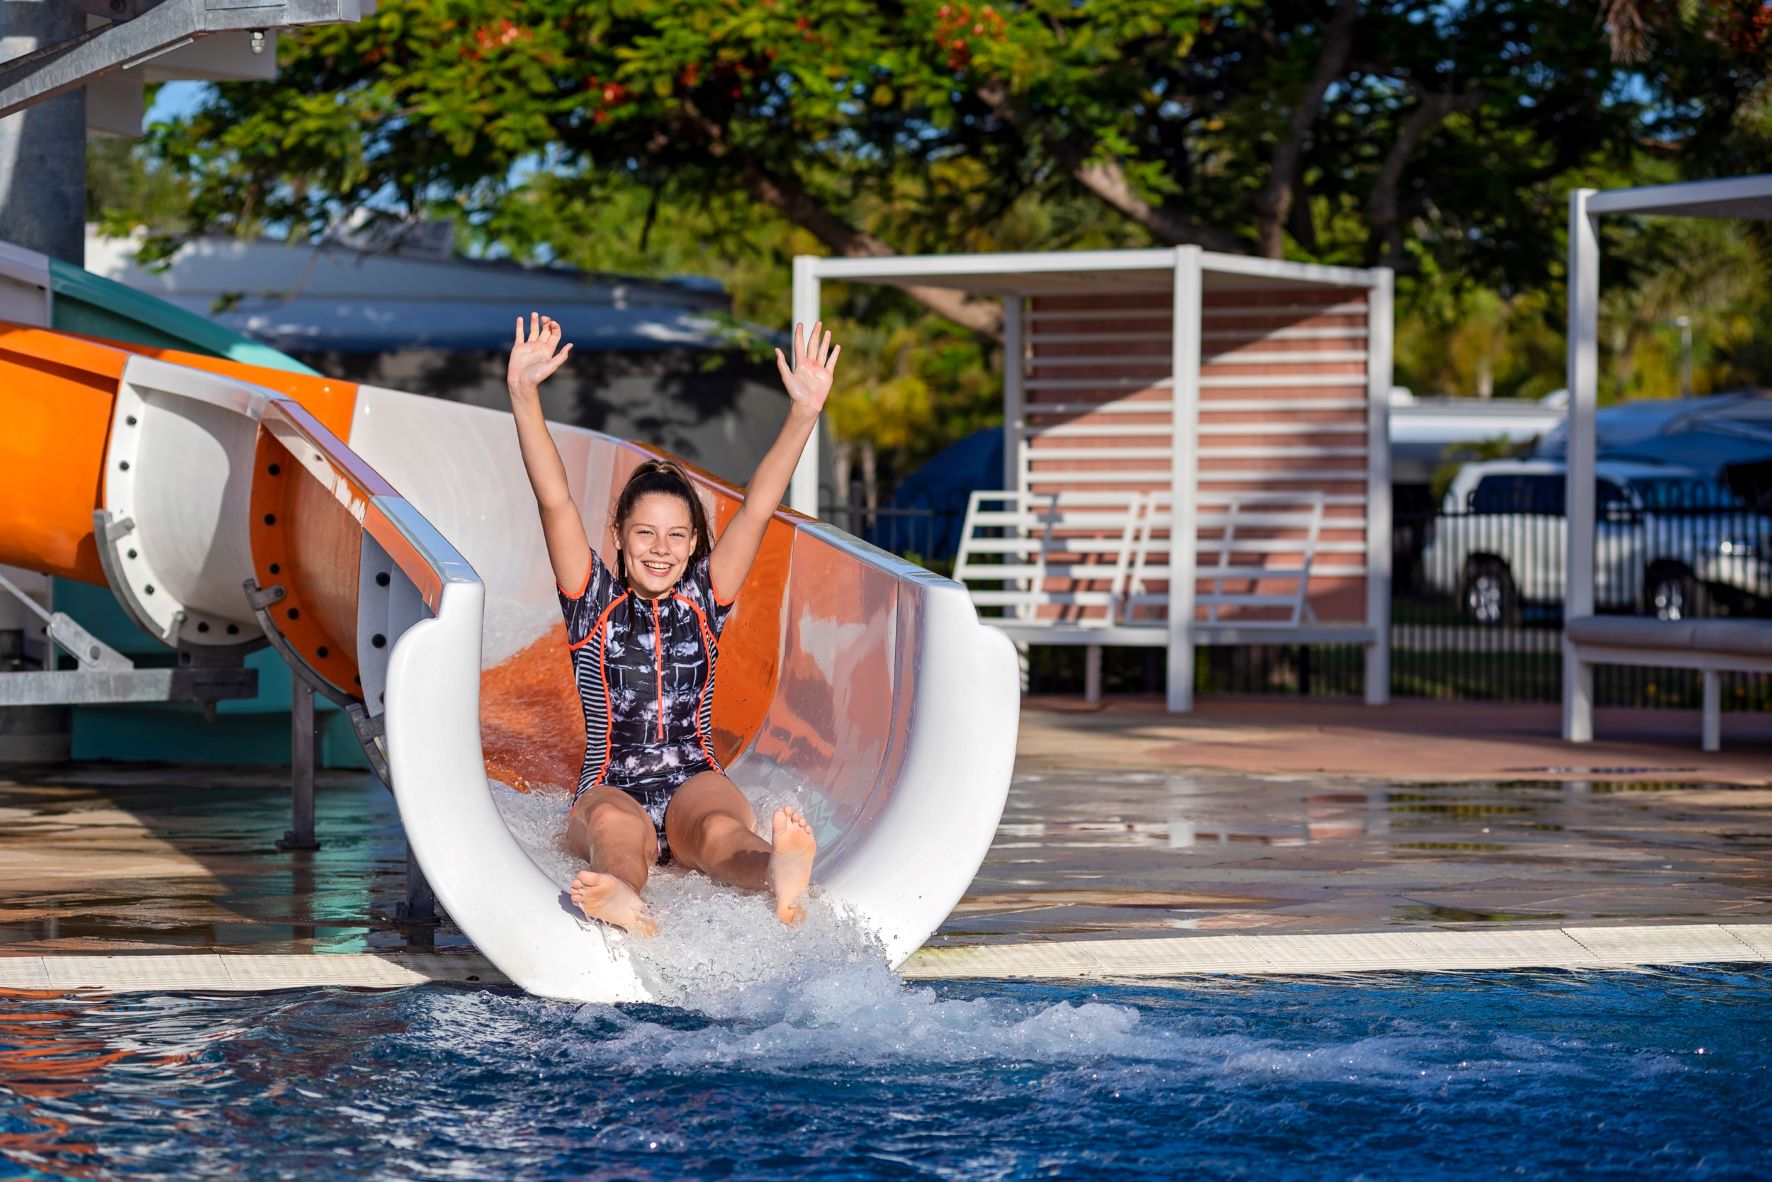 Australia's Best Waterparks are at Discovery | Discovery Parks